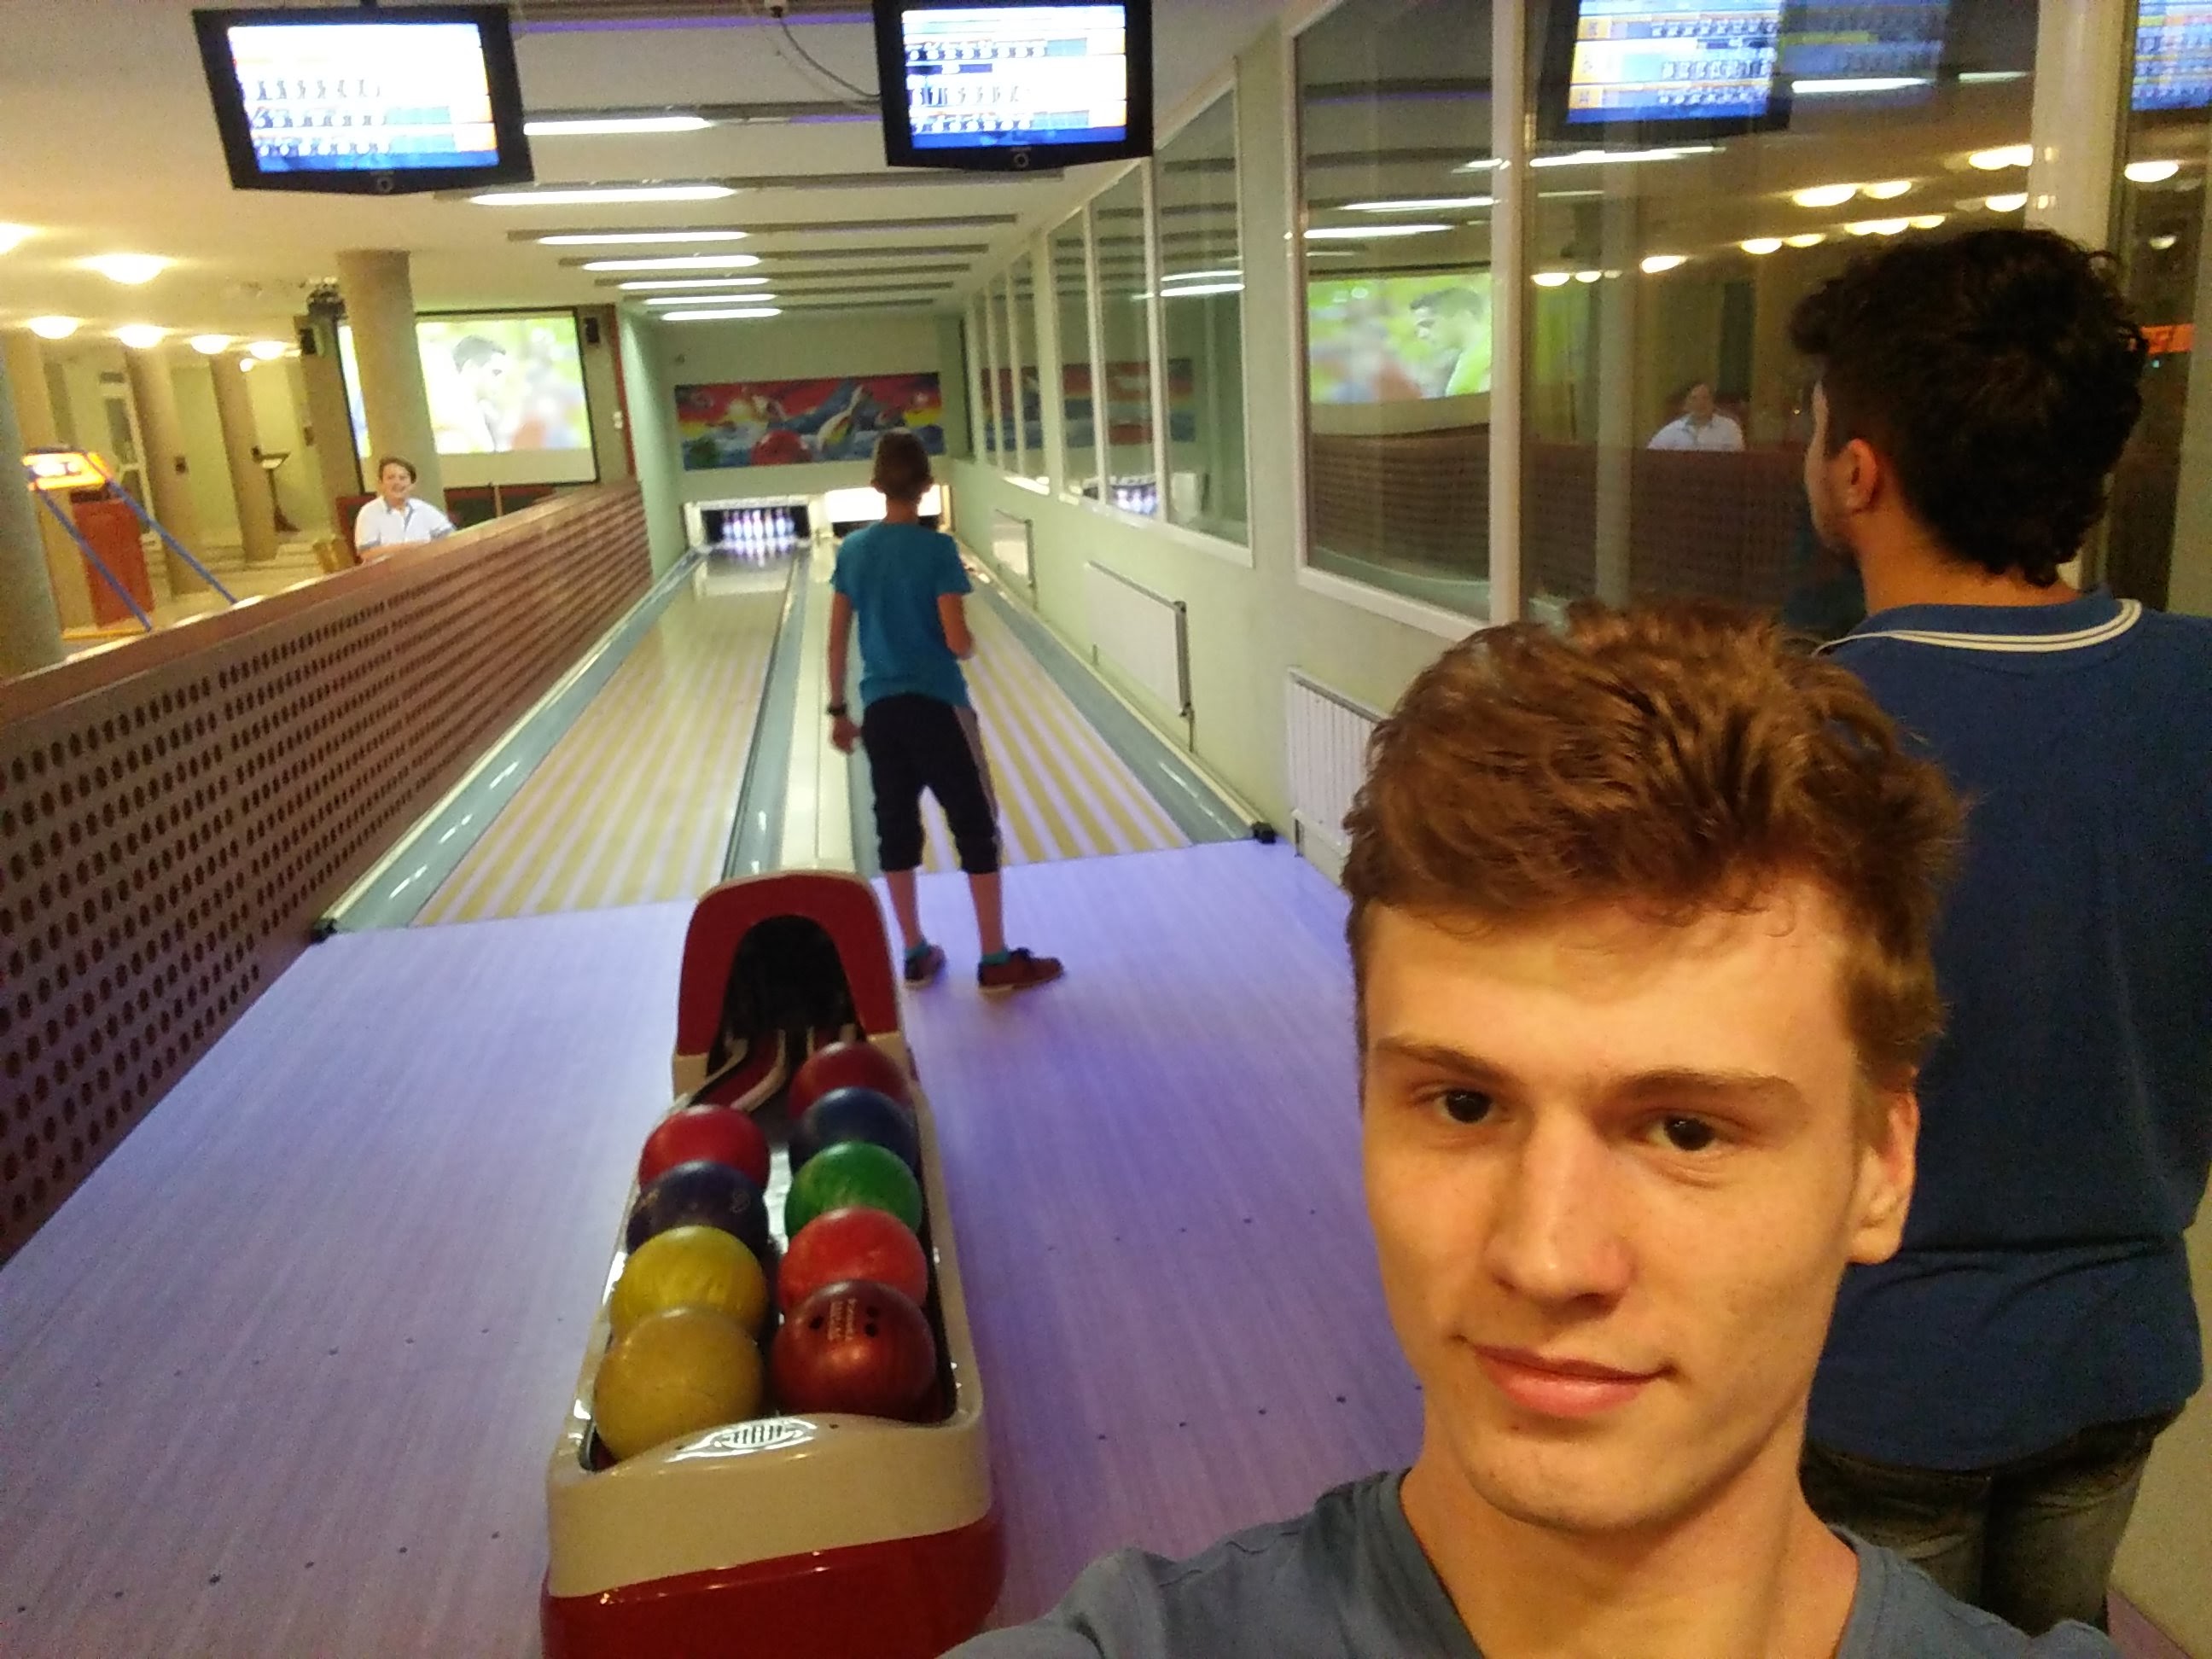 Playing bowling in breaks